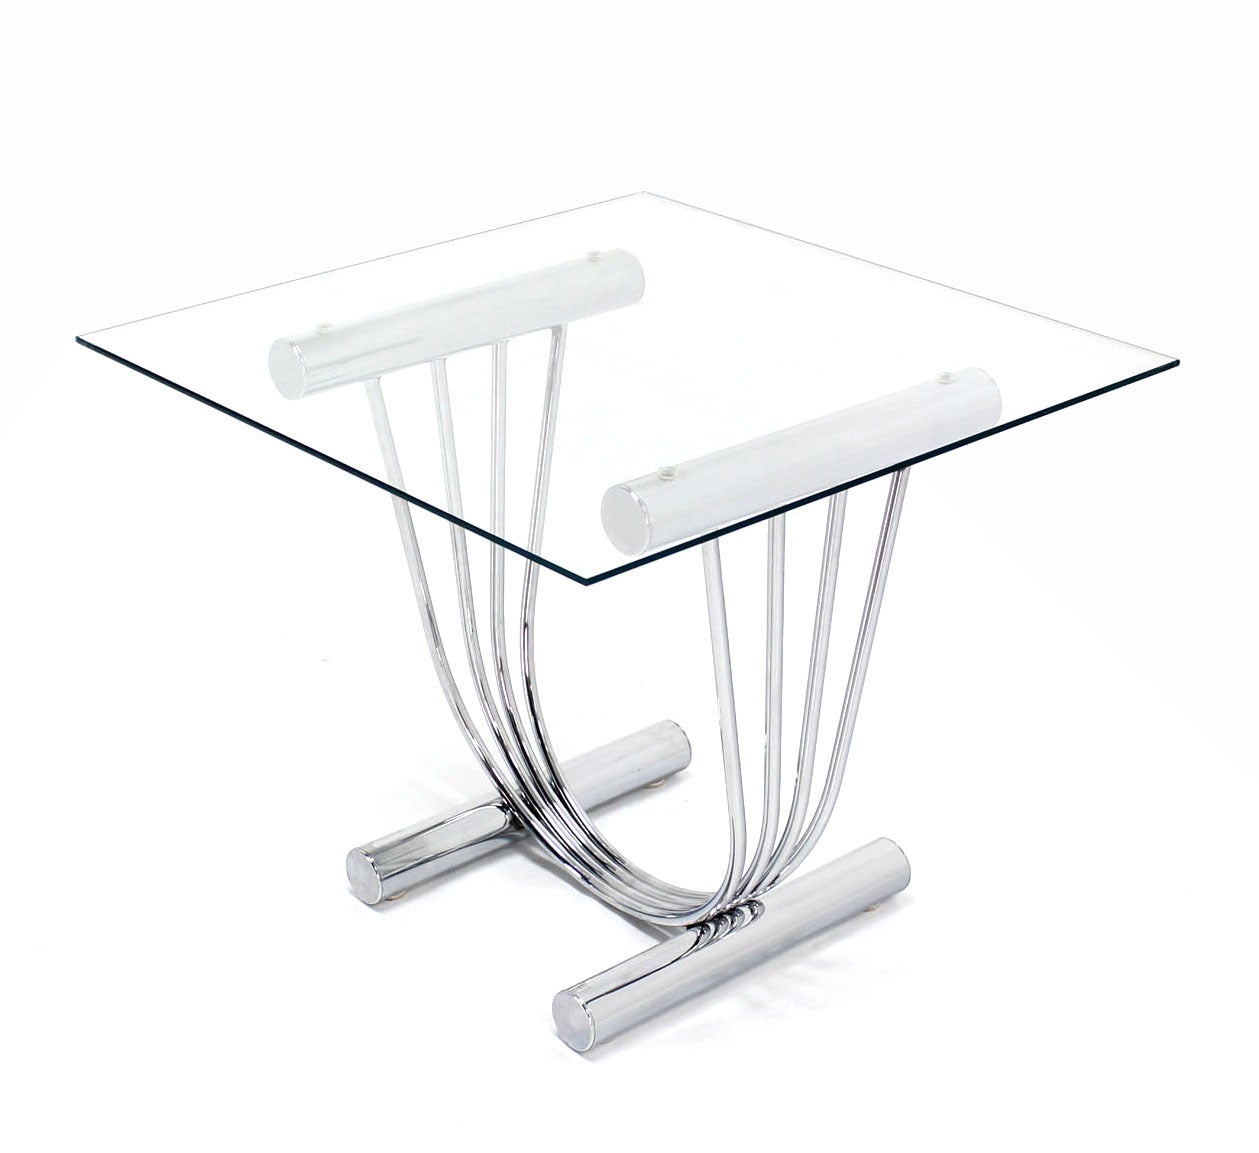 Pair of Chrome and Glass-Top End Tables with U-Shape Bases